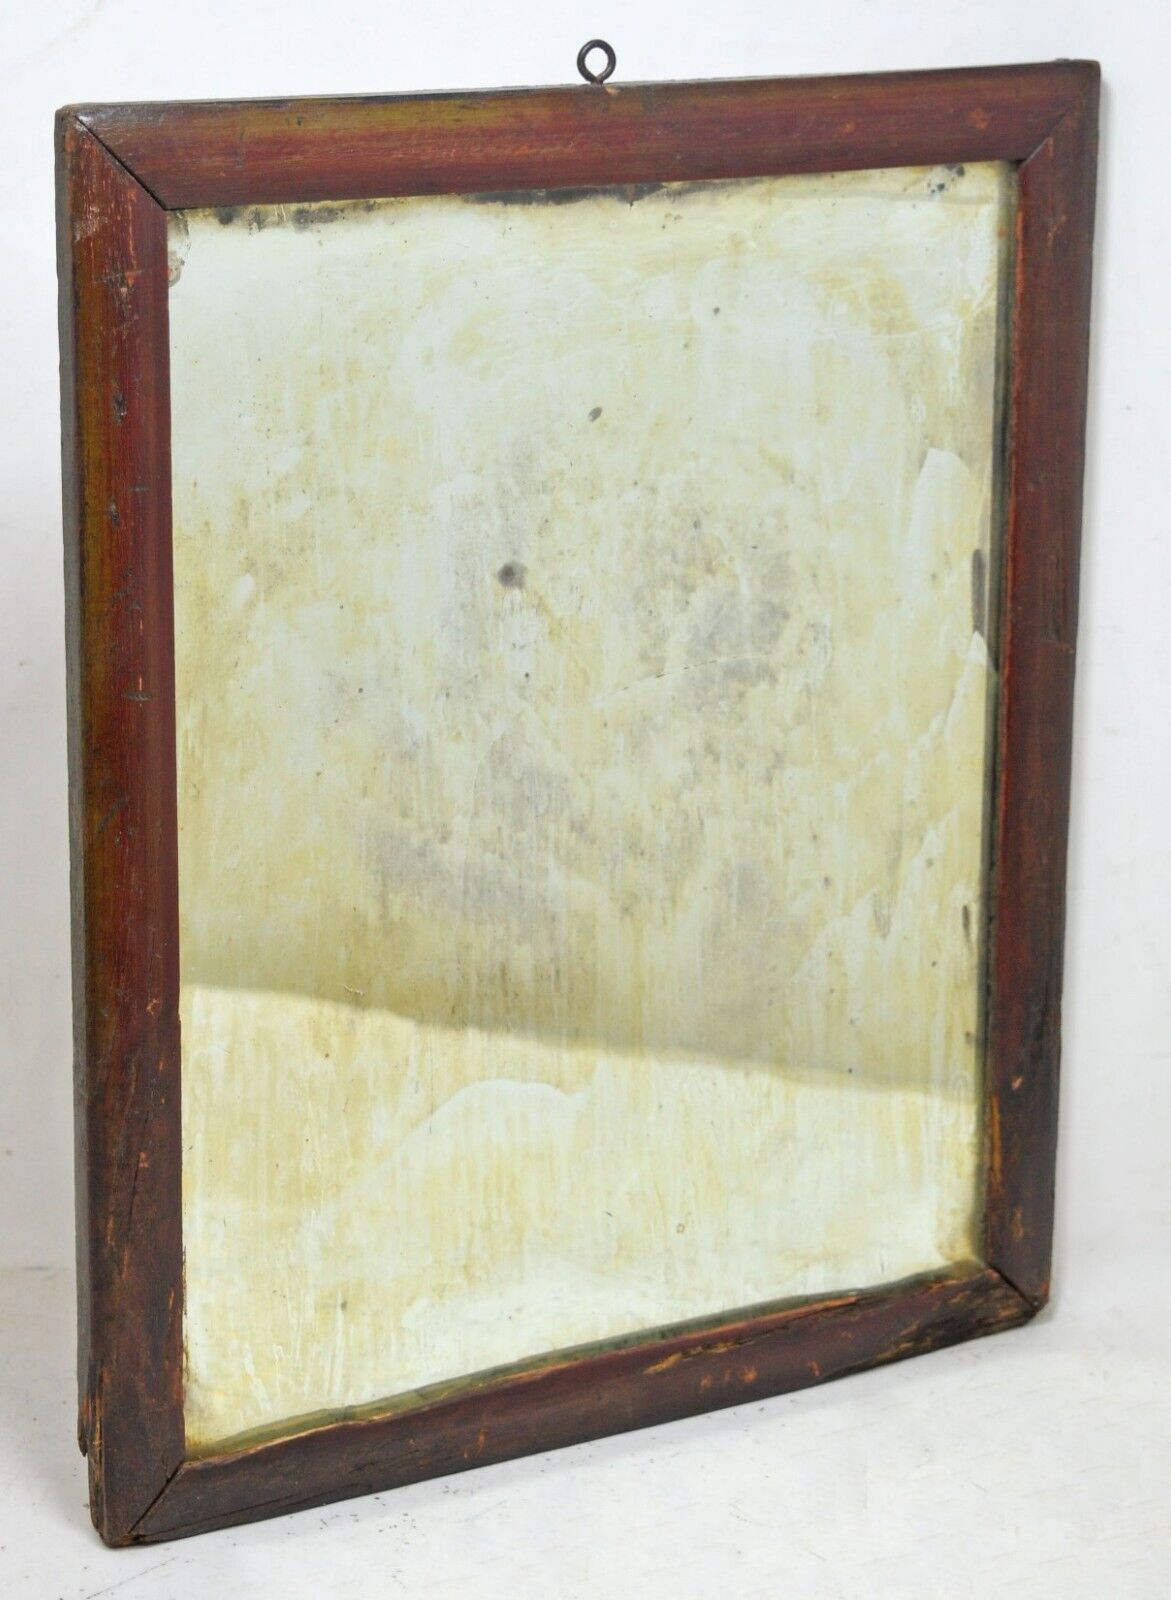 Antique Wooden Wall Hanging Mirror Frame Original Old Hand Crafted